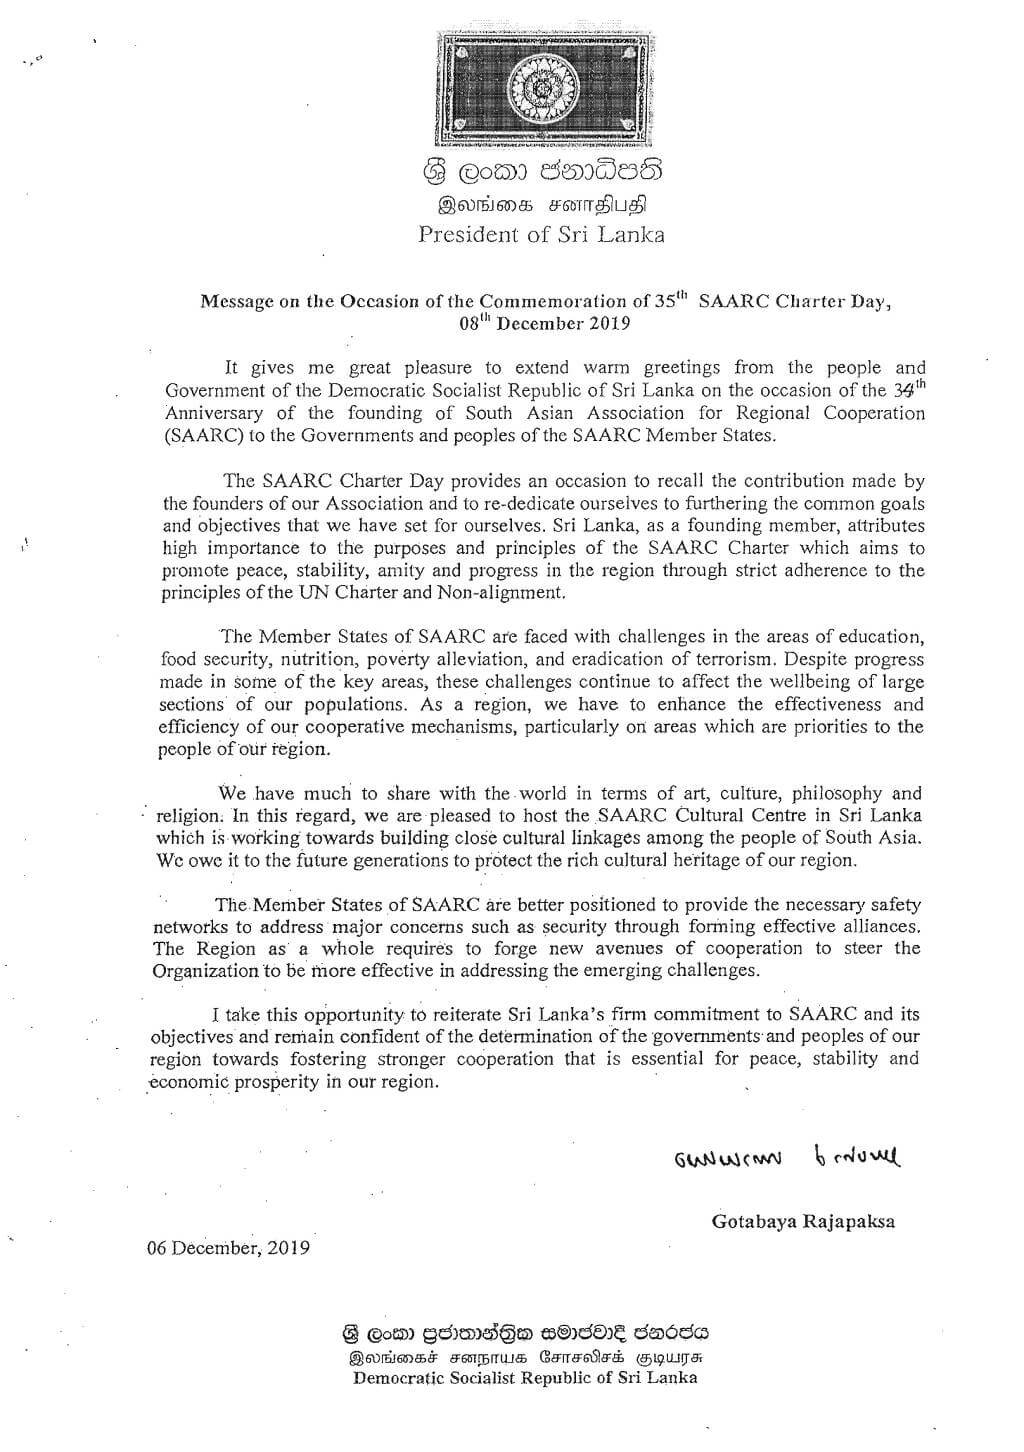 Message of H.E the President on the 35th SAARC Charter Day on 8 December 2019